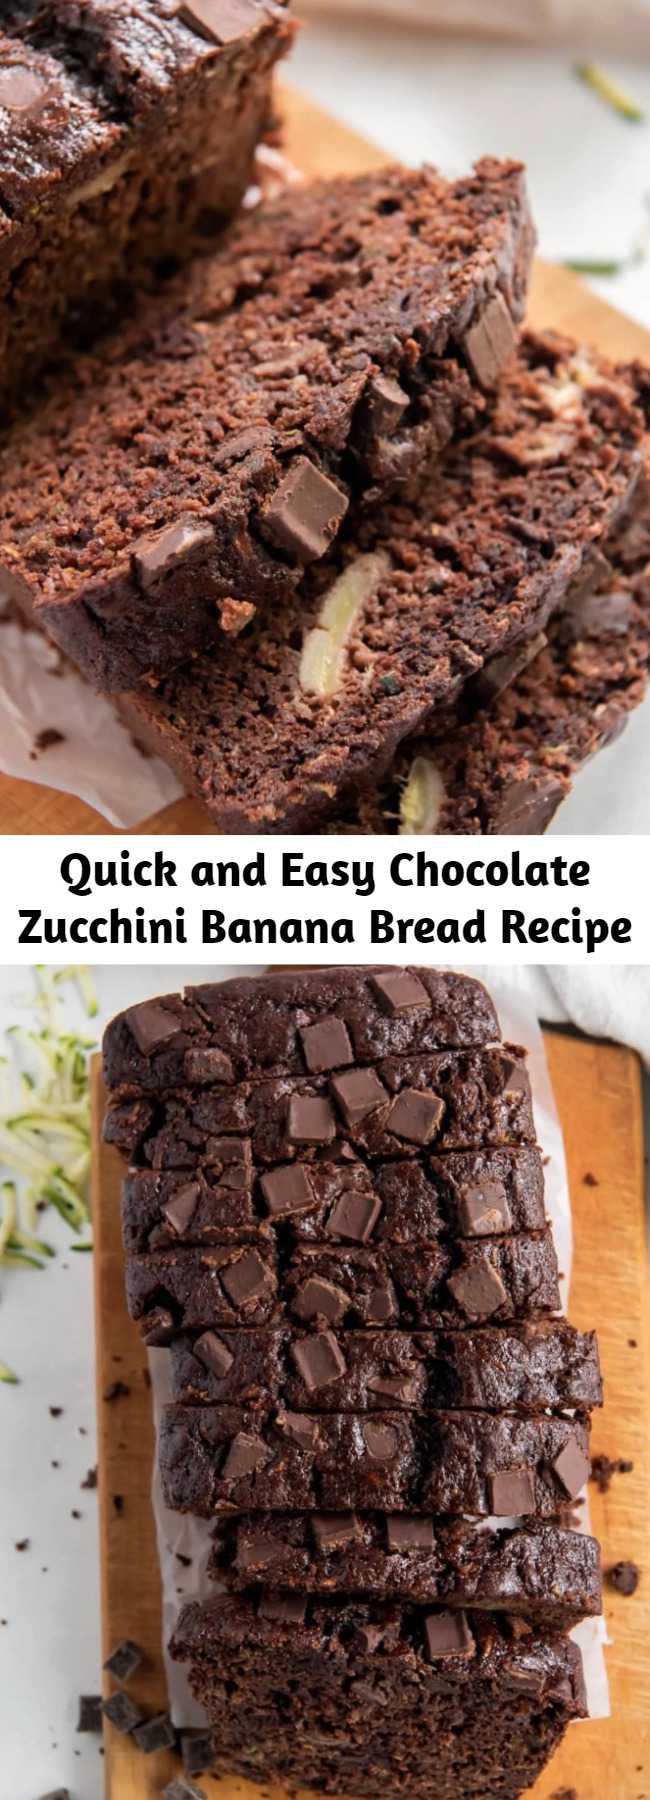 Quick and Easy Chocolate Zucchini Banana Bread Recipe - Chocolate zucchini banana bread is dense and moist. Filled with chocolate chips, it's the perfect bread to eat any time of day!